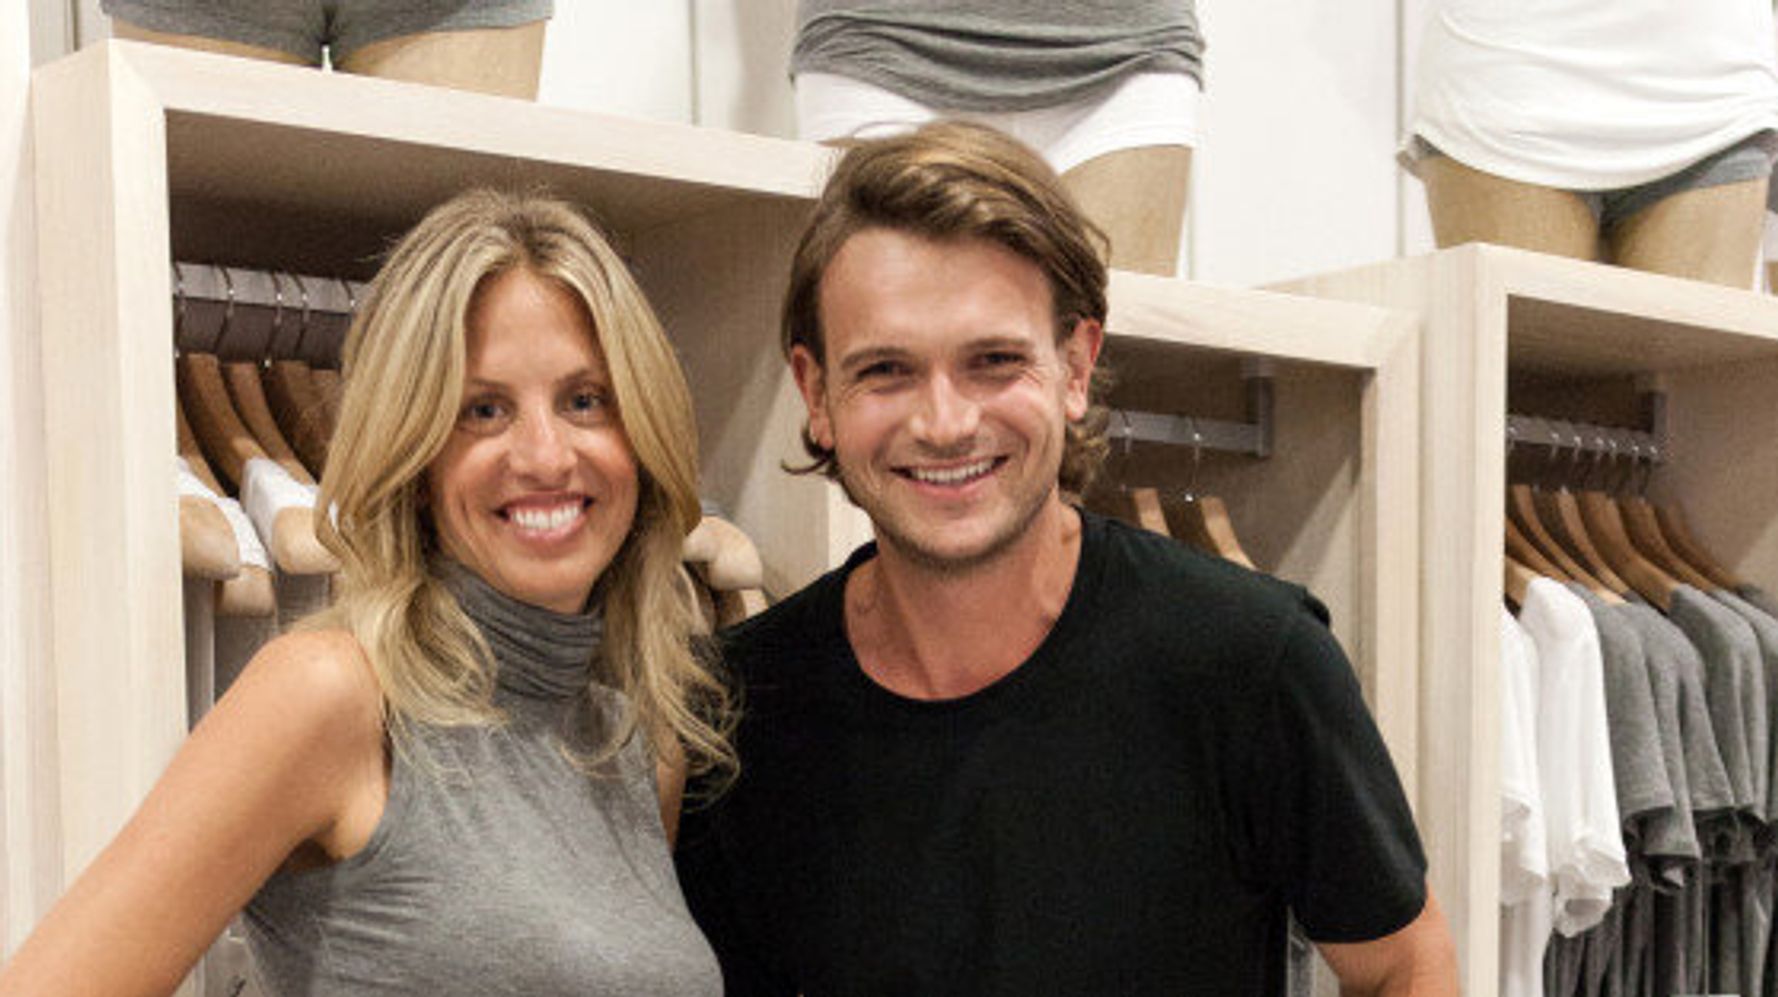 Lululemon Founder's Wife, Son Launch New Clothing Line In Vancouver